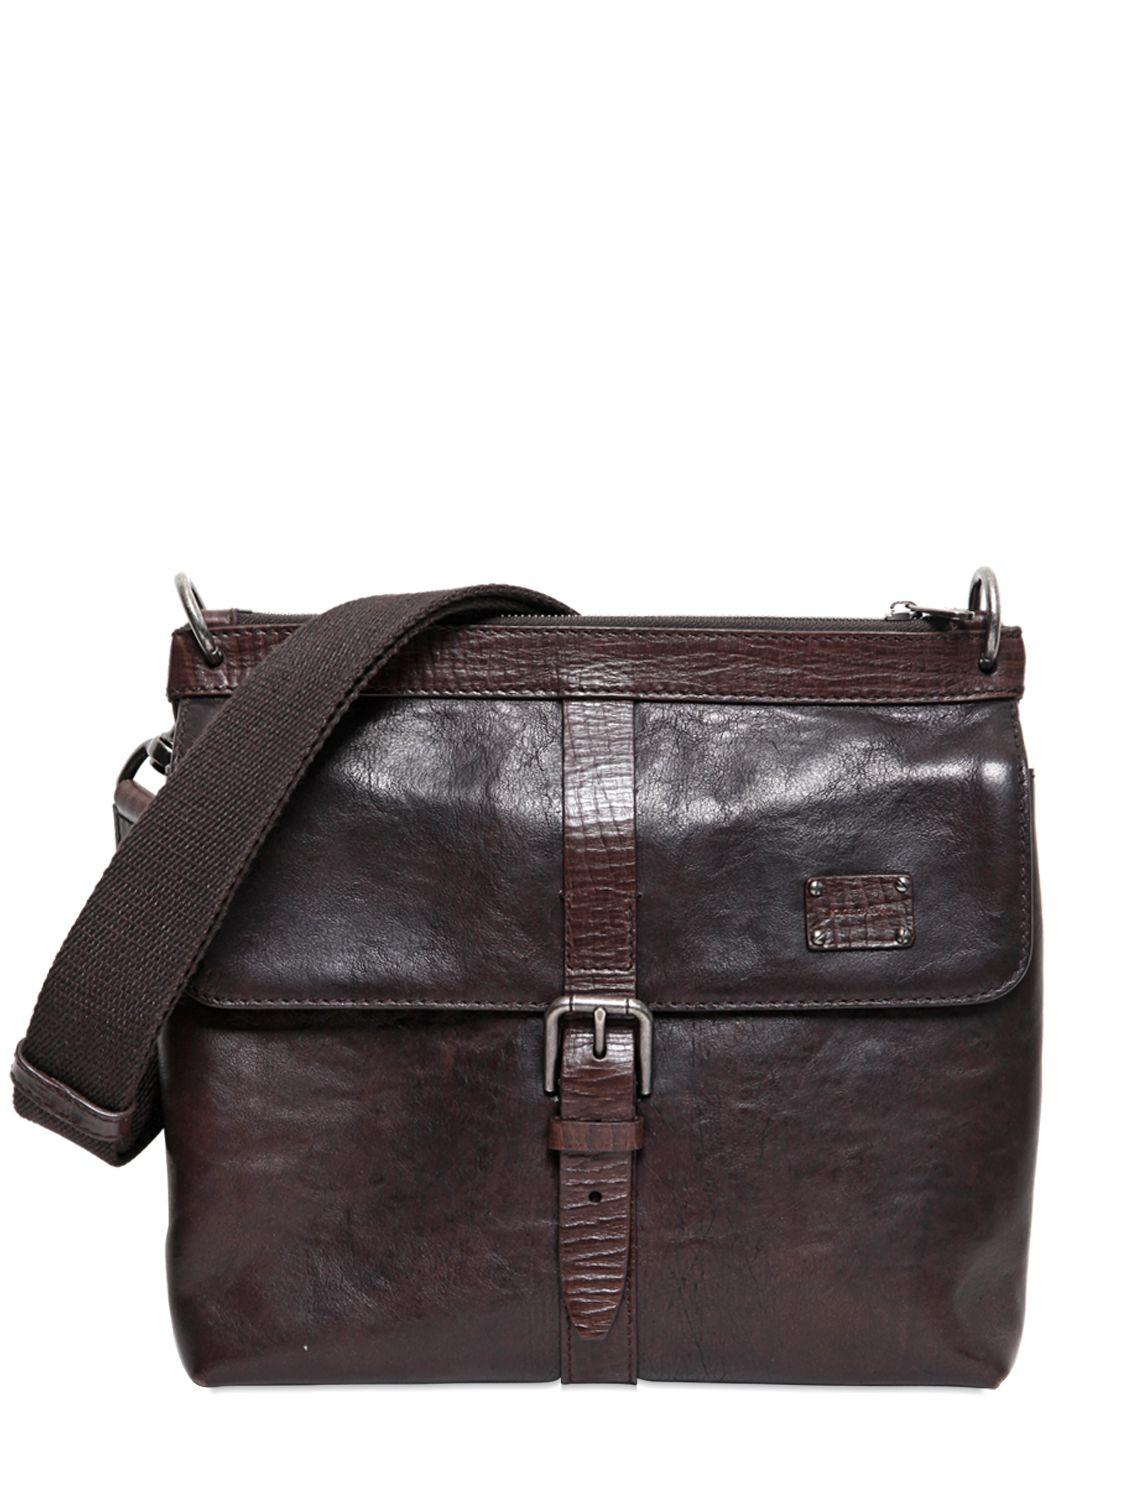 Dolce & Gabbana Brushed Leather Cross Body Bag in Brown for Men - Lyst